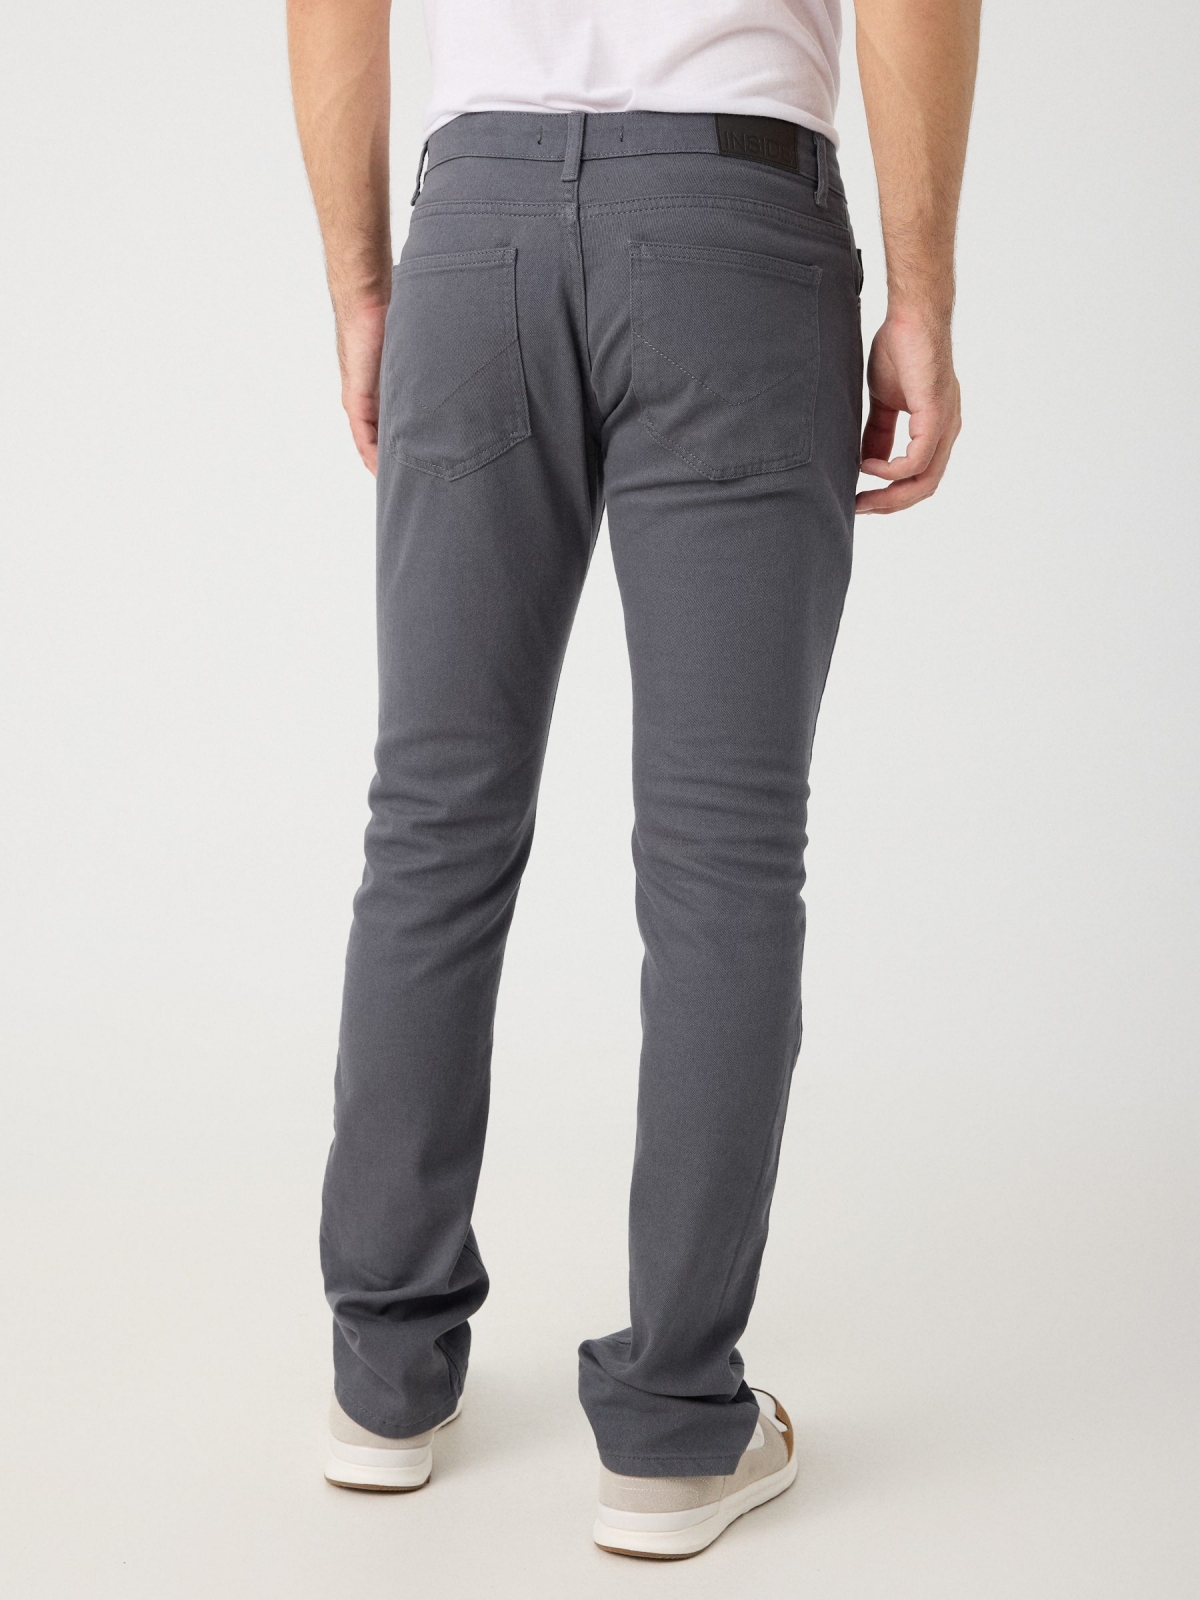 Regular five-pocket trousers grey middle back view